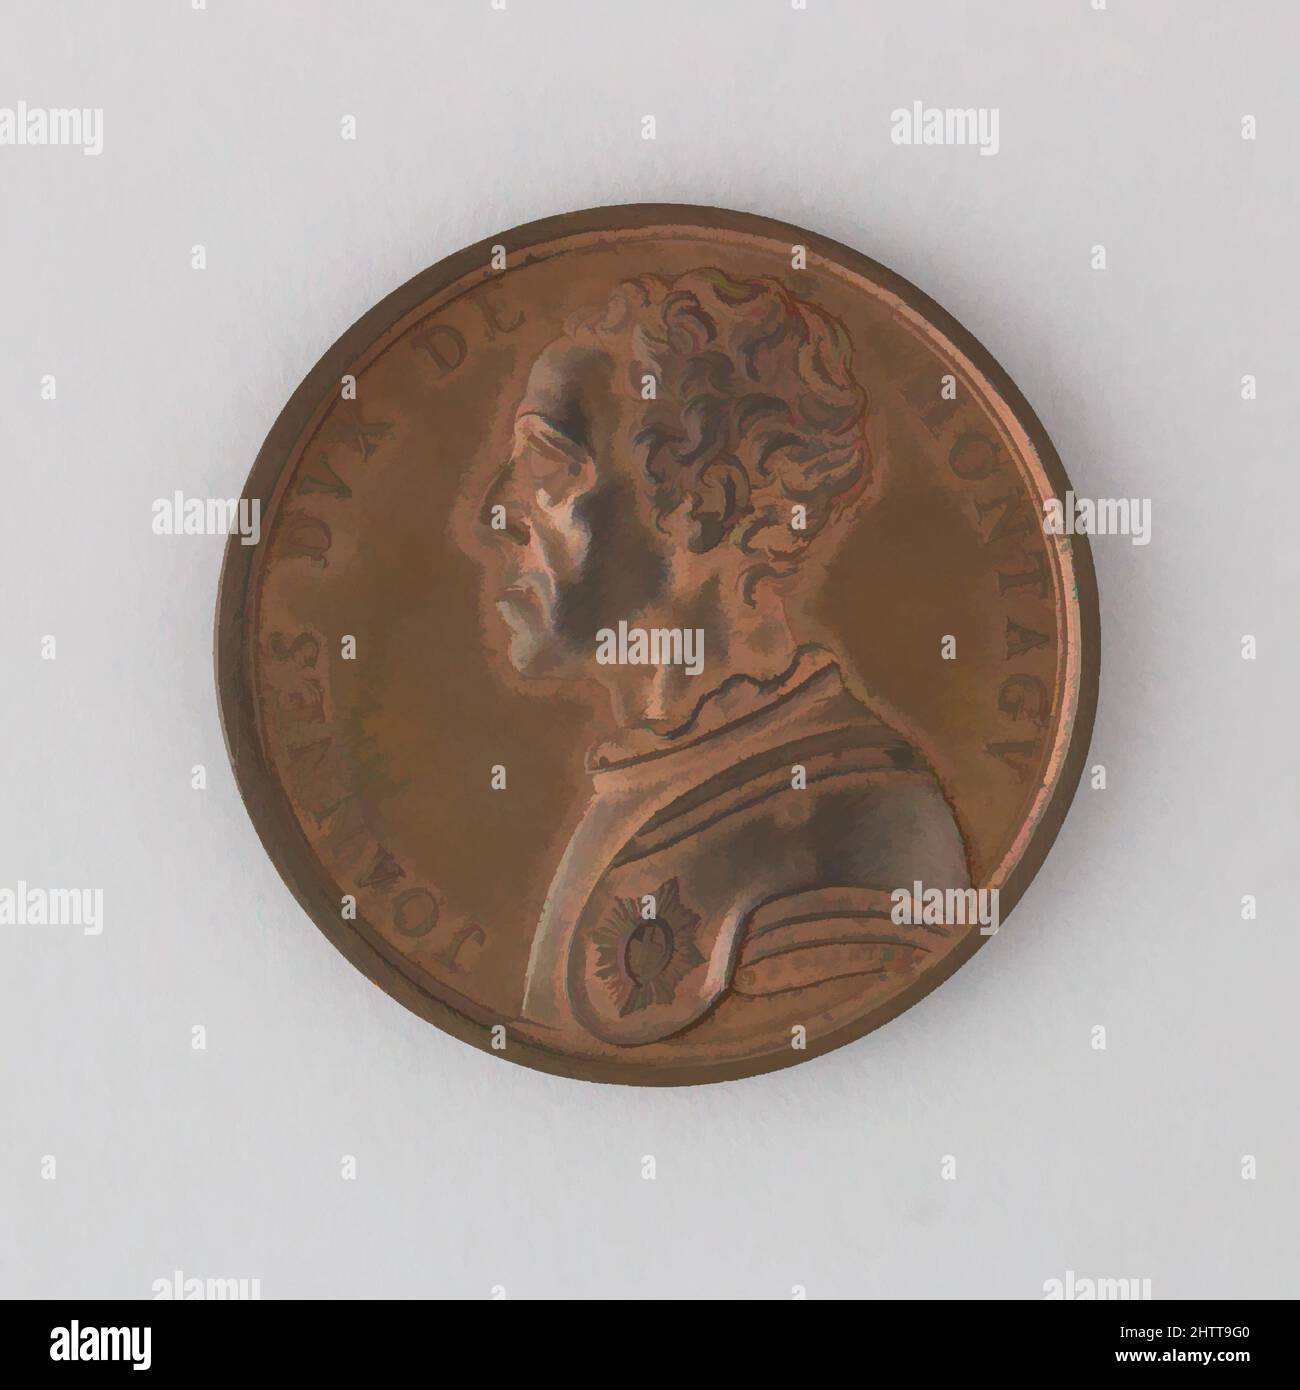 Art inspired by Medal Showing John, Second Duke of Montagu, 1751, Swiss, Bronze, Diam. 2 3/16 in. (5.6 cm); thickness 1/4 in. (0.6 cm); Wt. 2.6 oz. (73.7 g), Miscellaneous-Coins and Medals, Classic works modernized by Artotop with a splash of modernity. Shapes, color and value, eye-catching visual impact on art. Emotions through freedom of artworks in a contemporary way. A timeless message pursuing a wildly creative new direction. Artists turning to the digital medium and creating the Artotop NFT Stock Photo